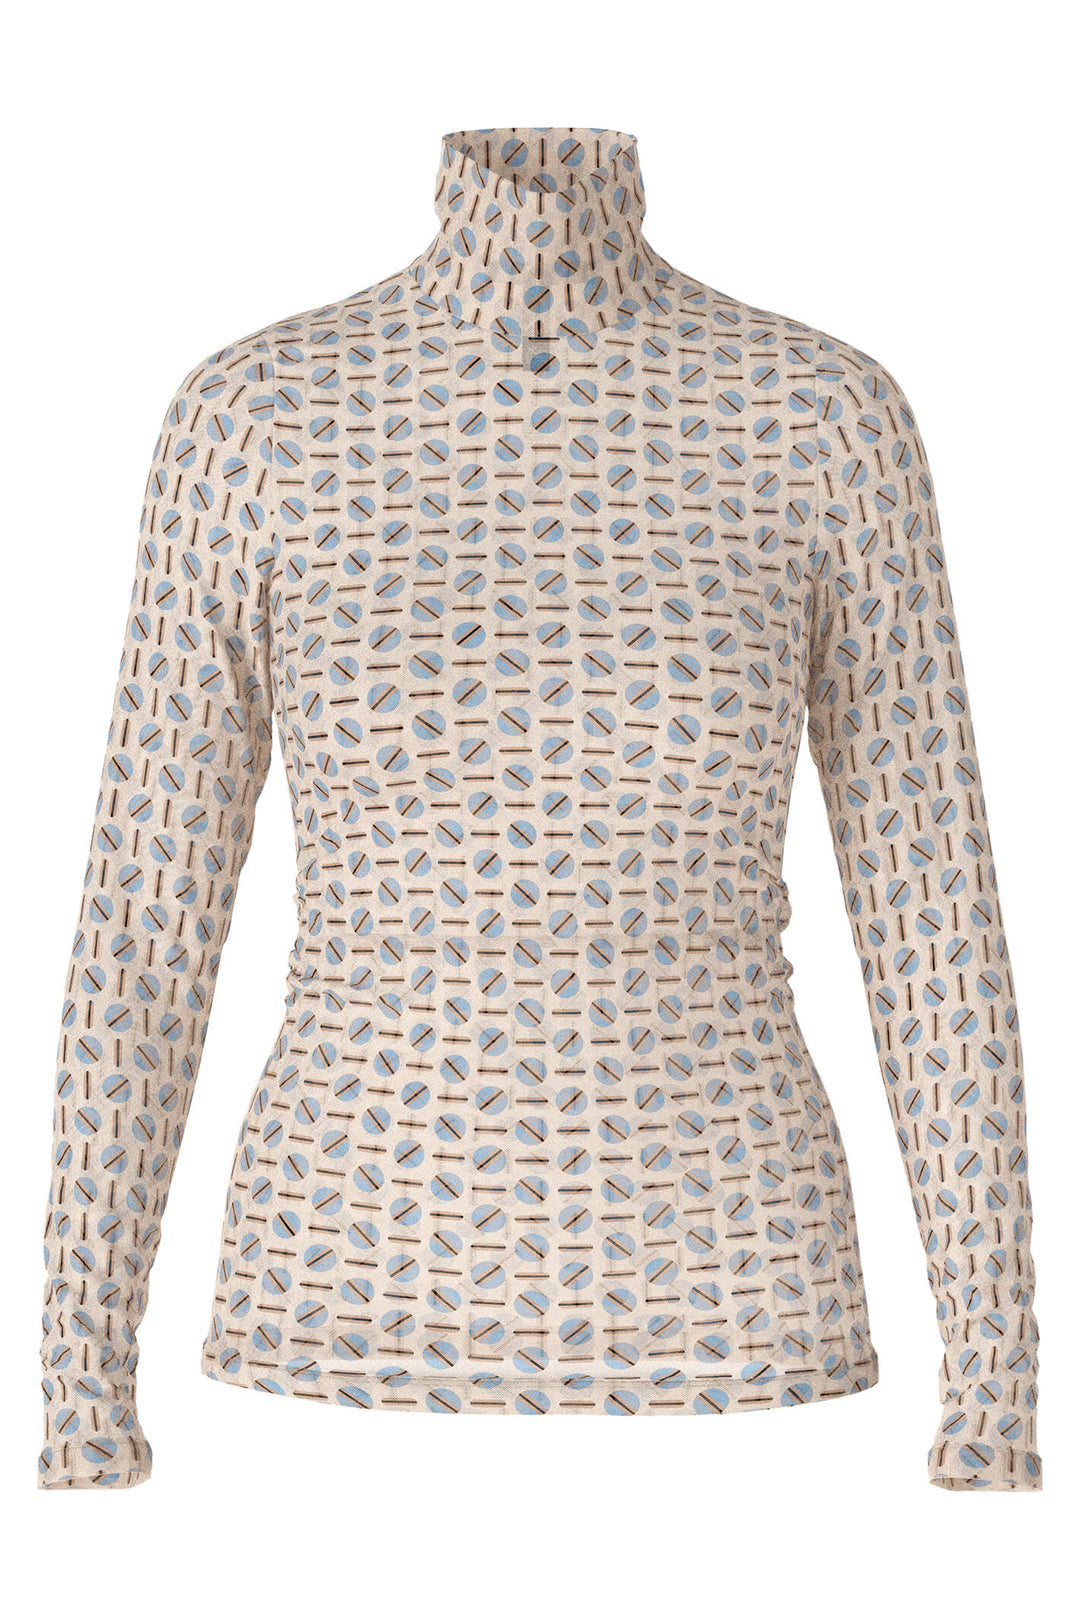 Marc Cain Collections VC 48.12 J07 132 Dark Cream Print Rollneck Top - Olivia Grace Fashion